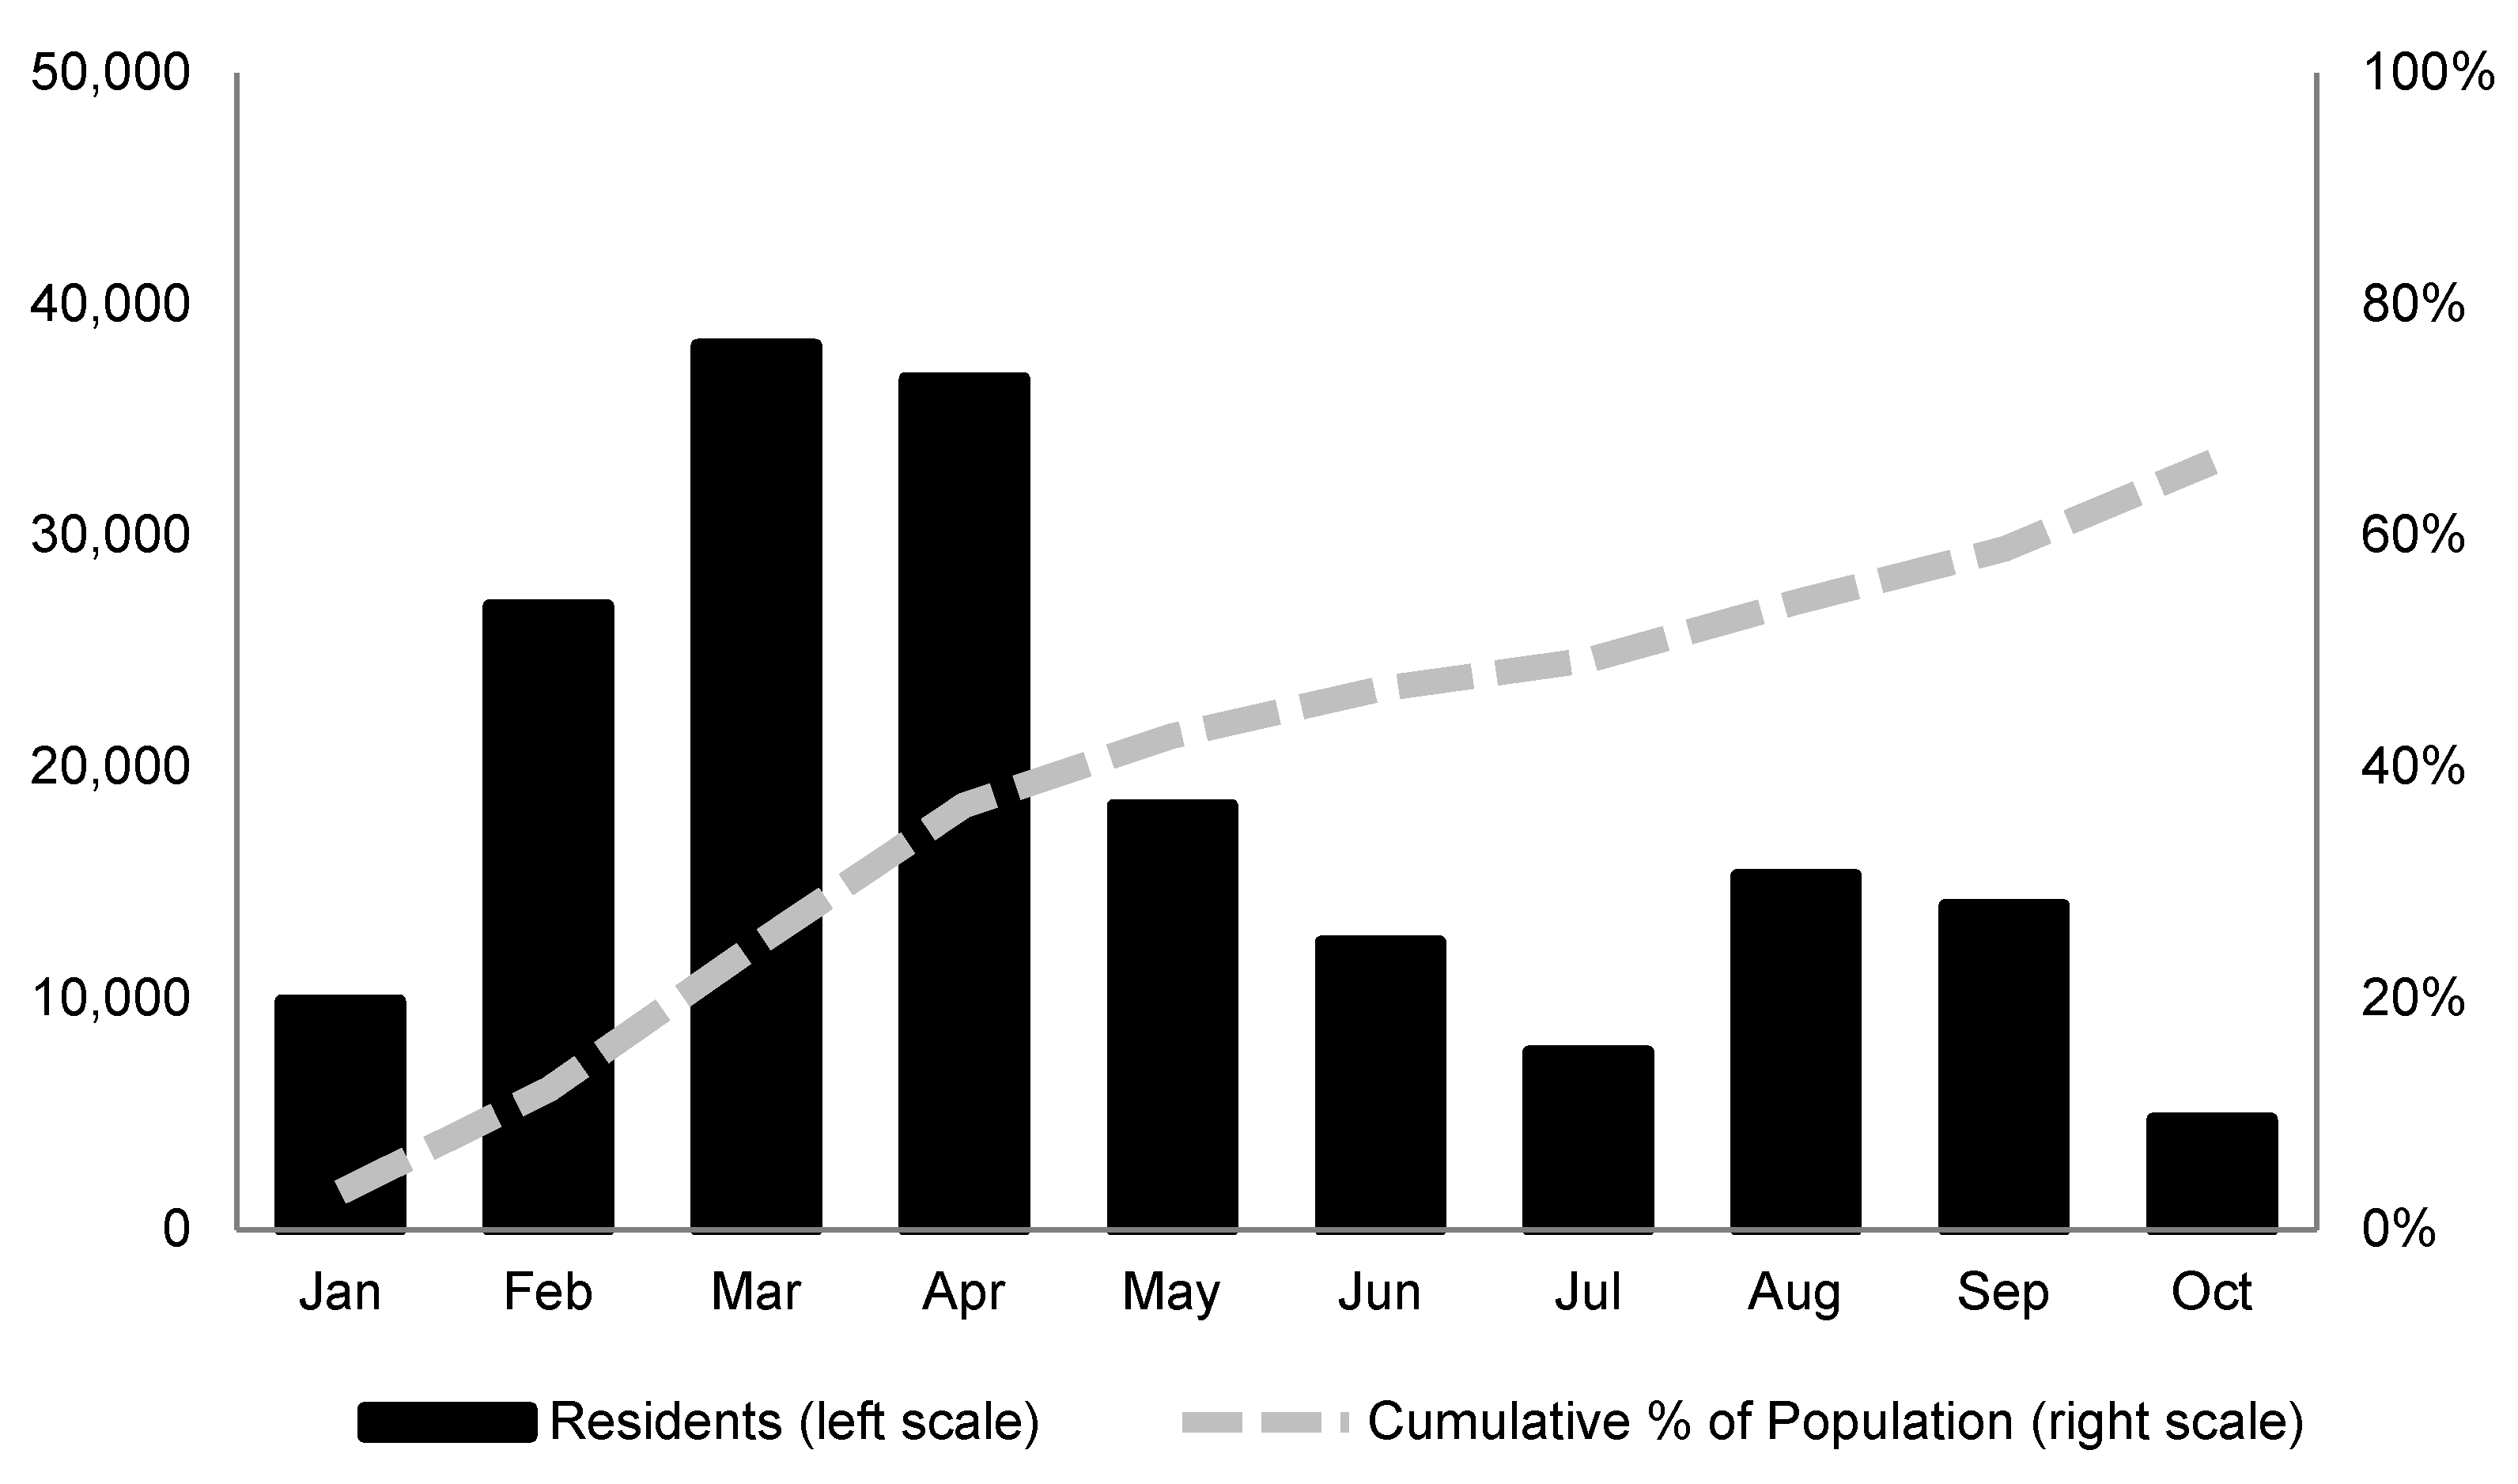 Disparities in COVID-19 Vaccination Coverage Between Urban and